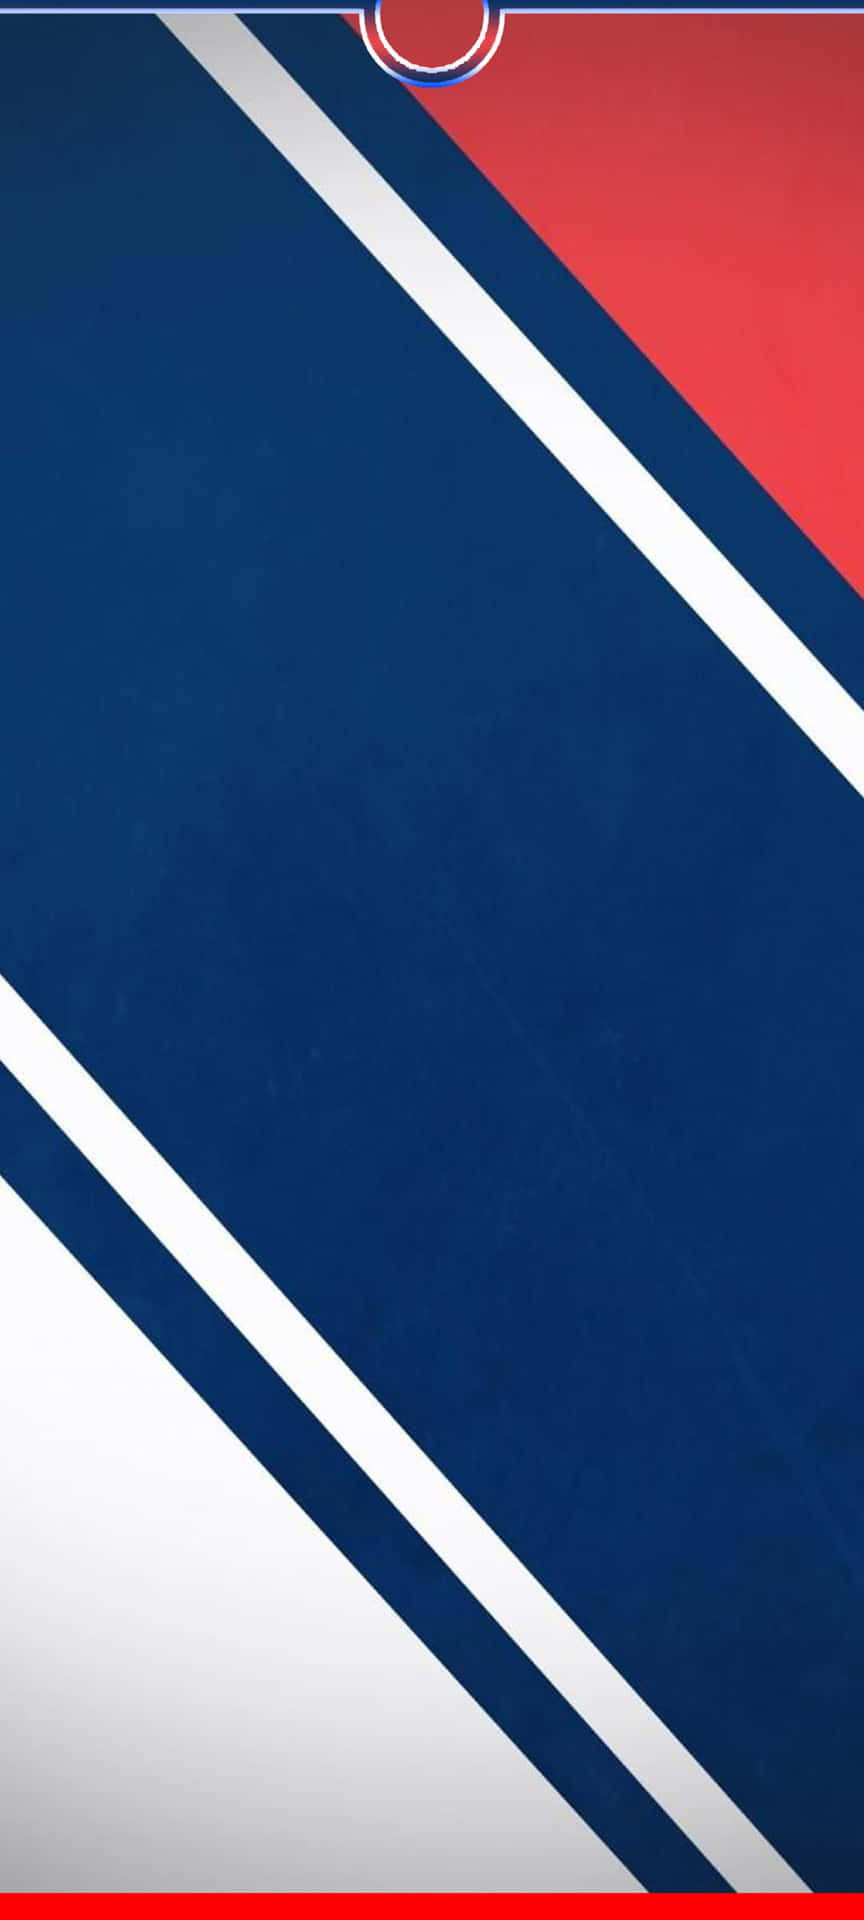 The New York Rangers Logo Is Shown On A Blue And Red Background Background